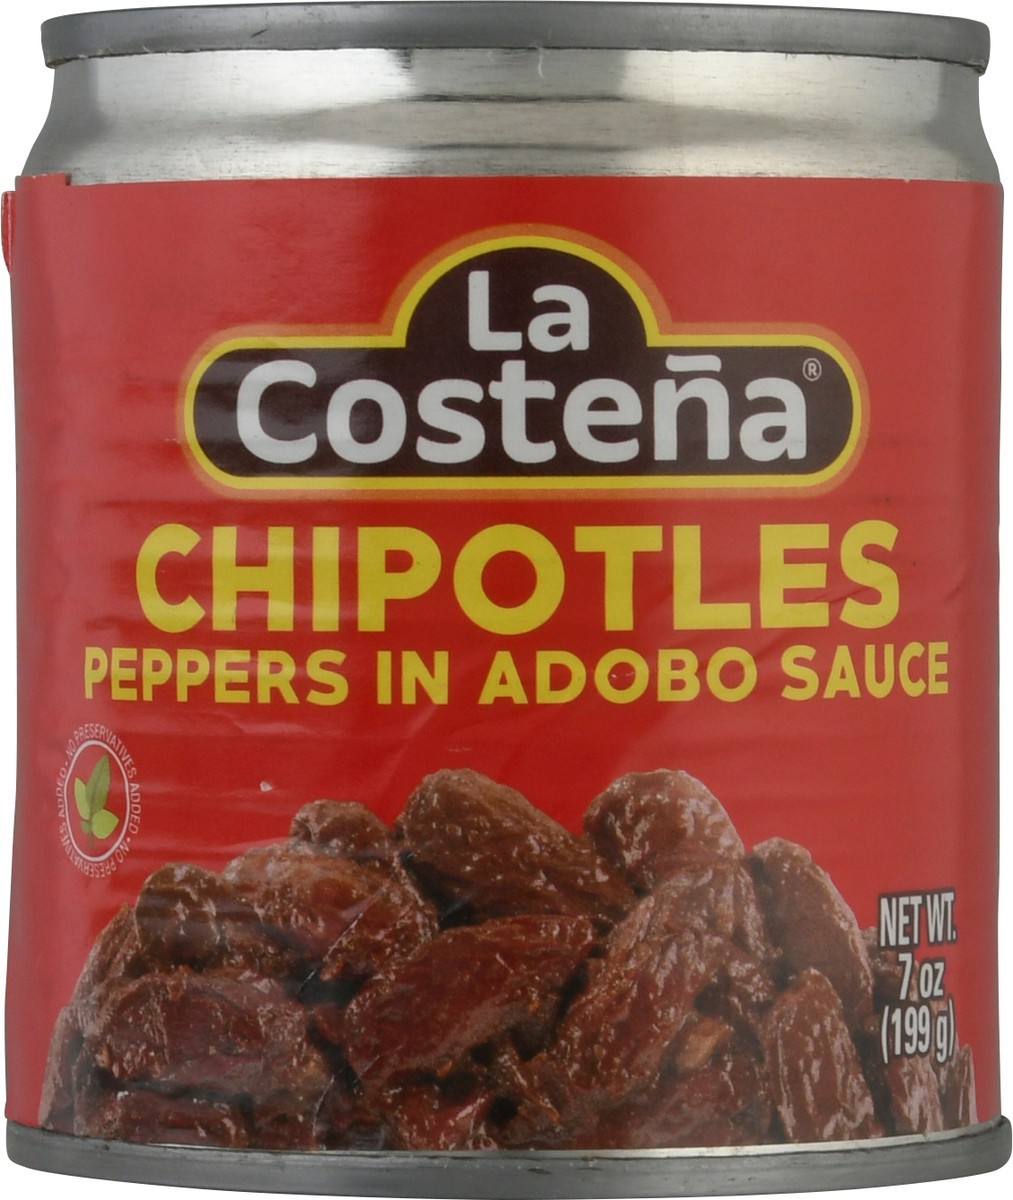 slide 3 of 12, La Costeña Chipotle Peppers in Adobo Sauce, 7 oz